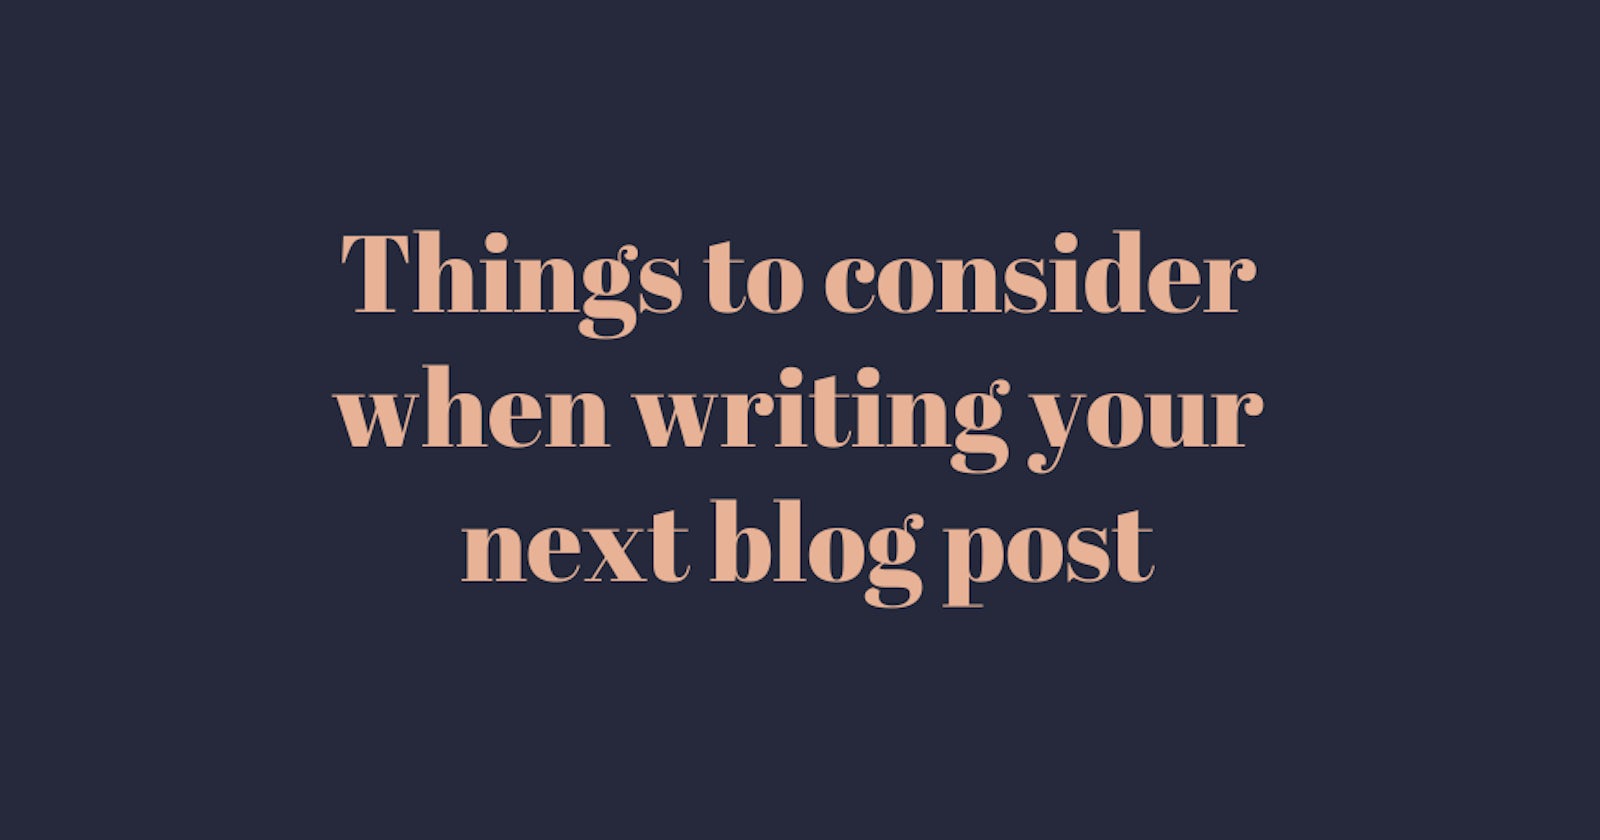 Things to consider when writing your next blog post